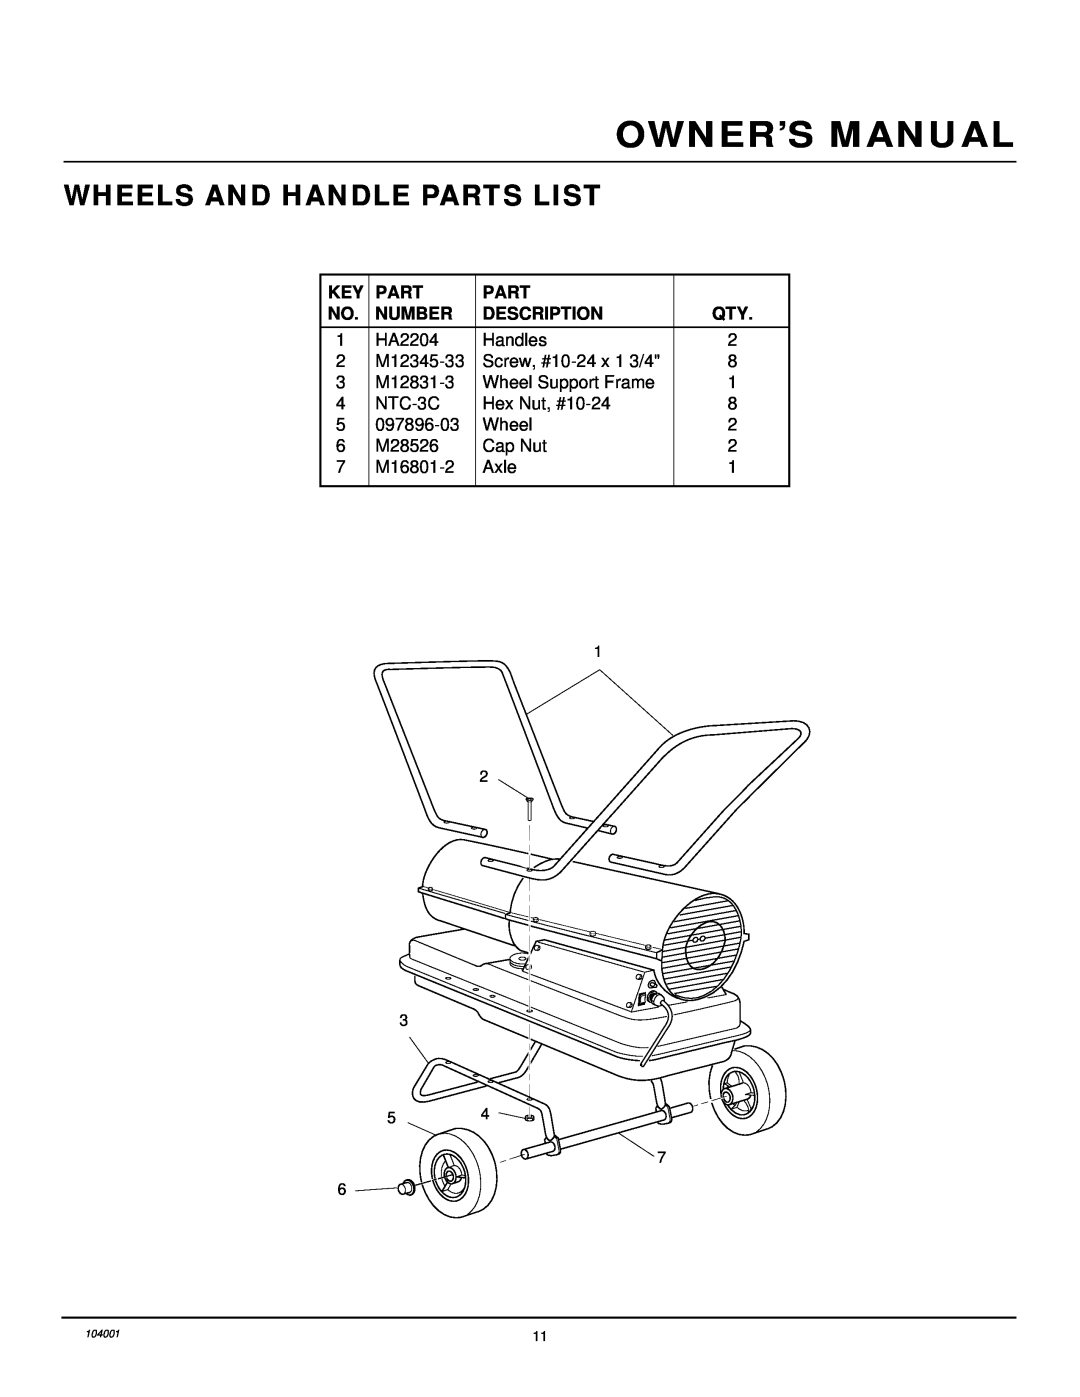 Desa 10BY150ECB owner manual Wheels And Handle Parts List, Number, Description 